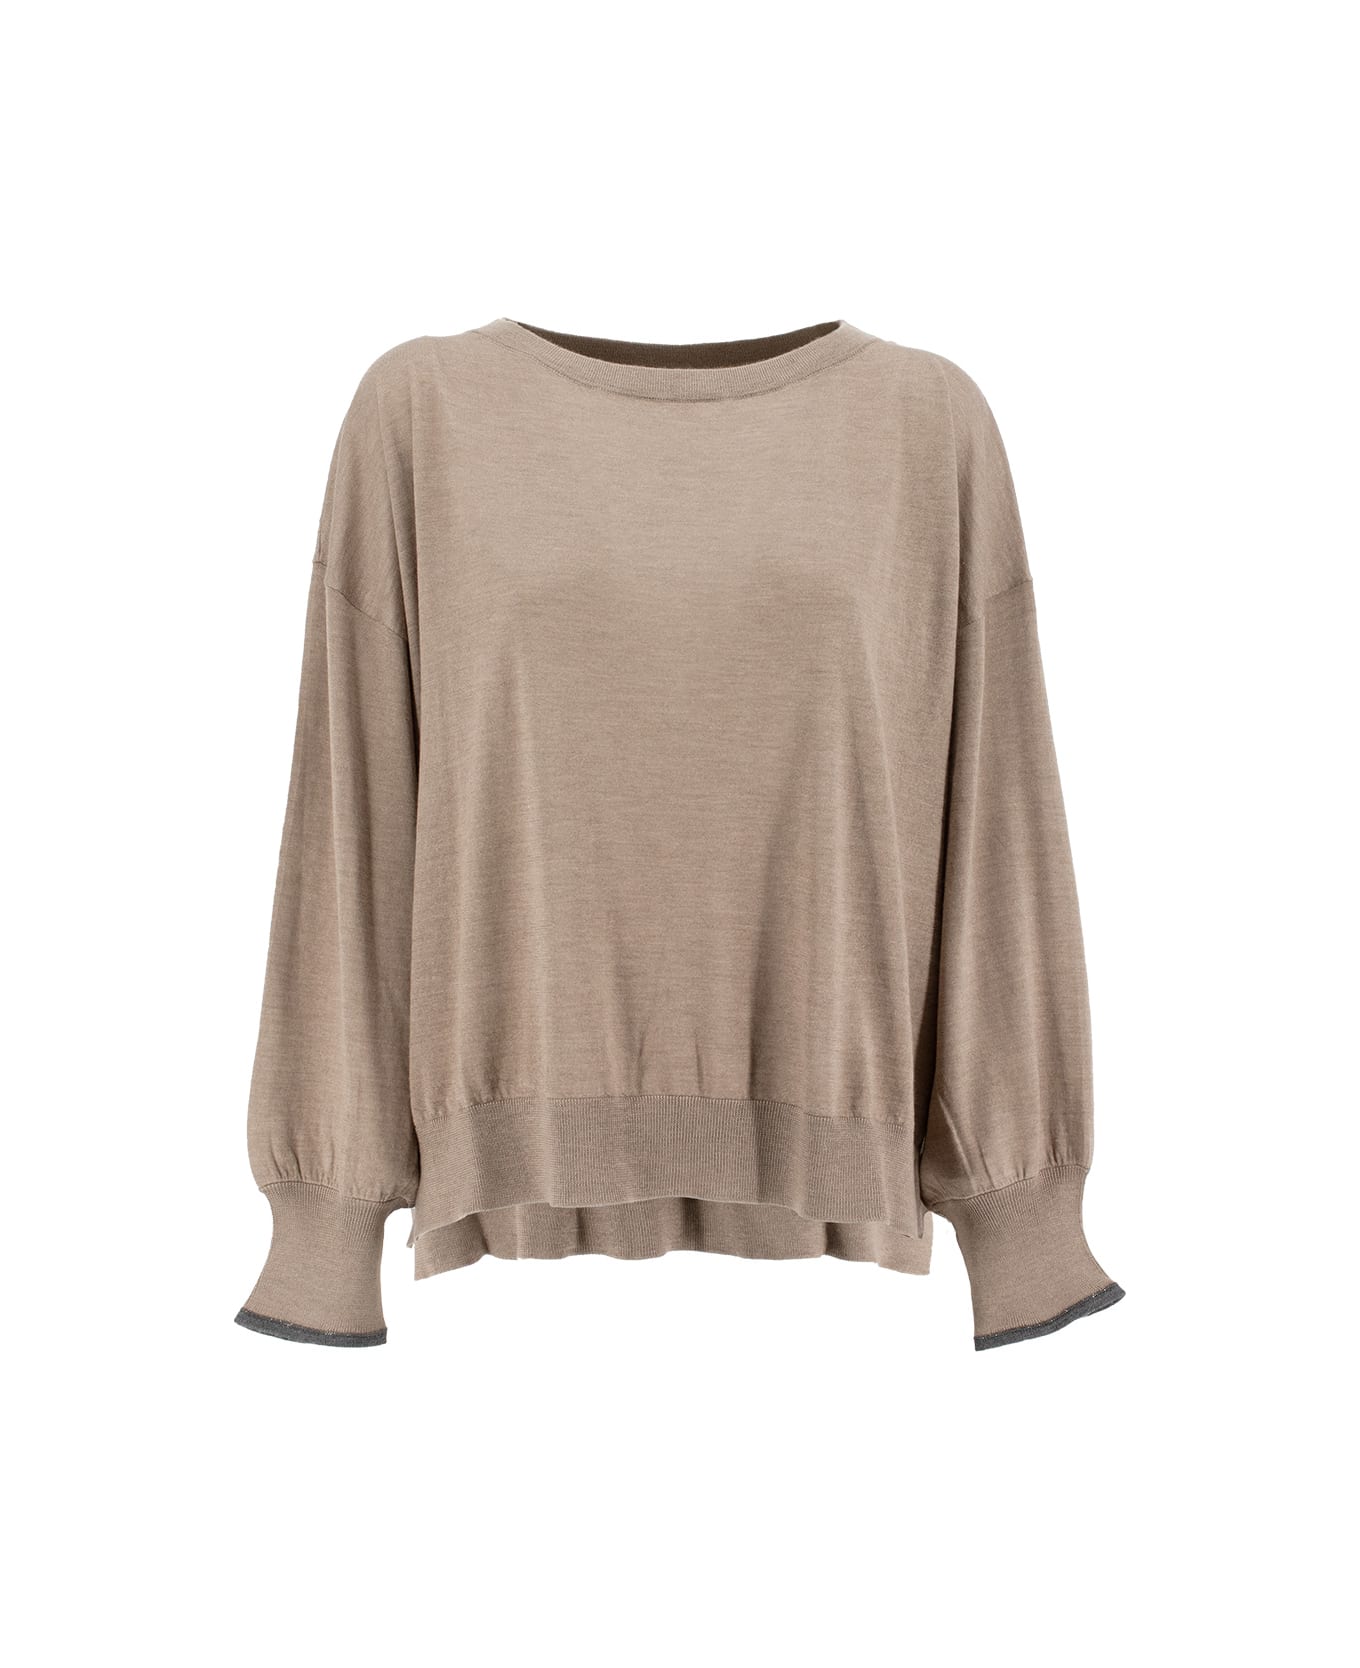 Brunello Cucinelli Cashmere And Silk Knit Sweater - ROPE ニットウェア